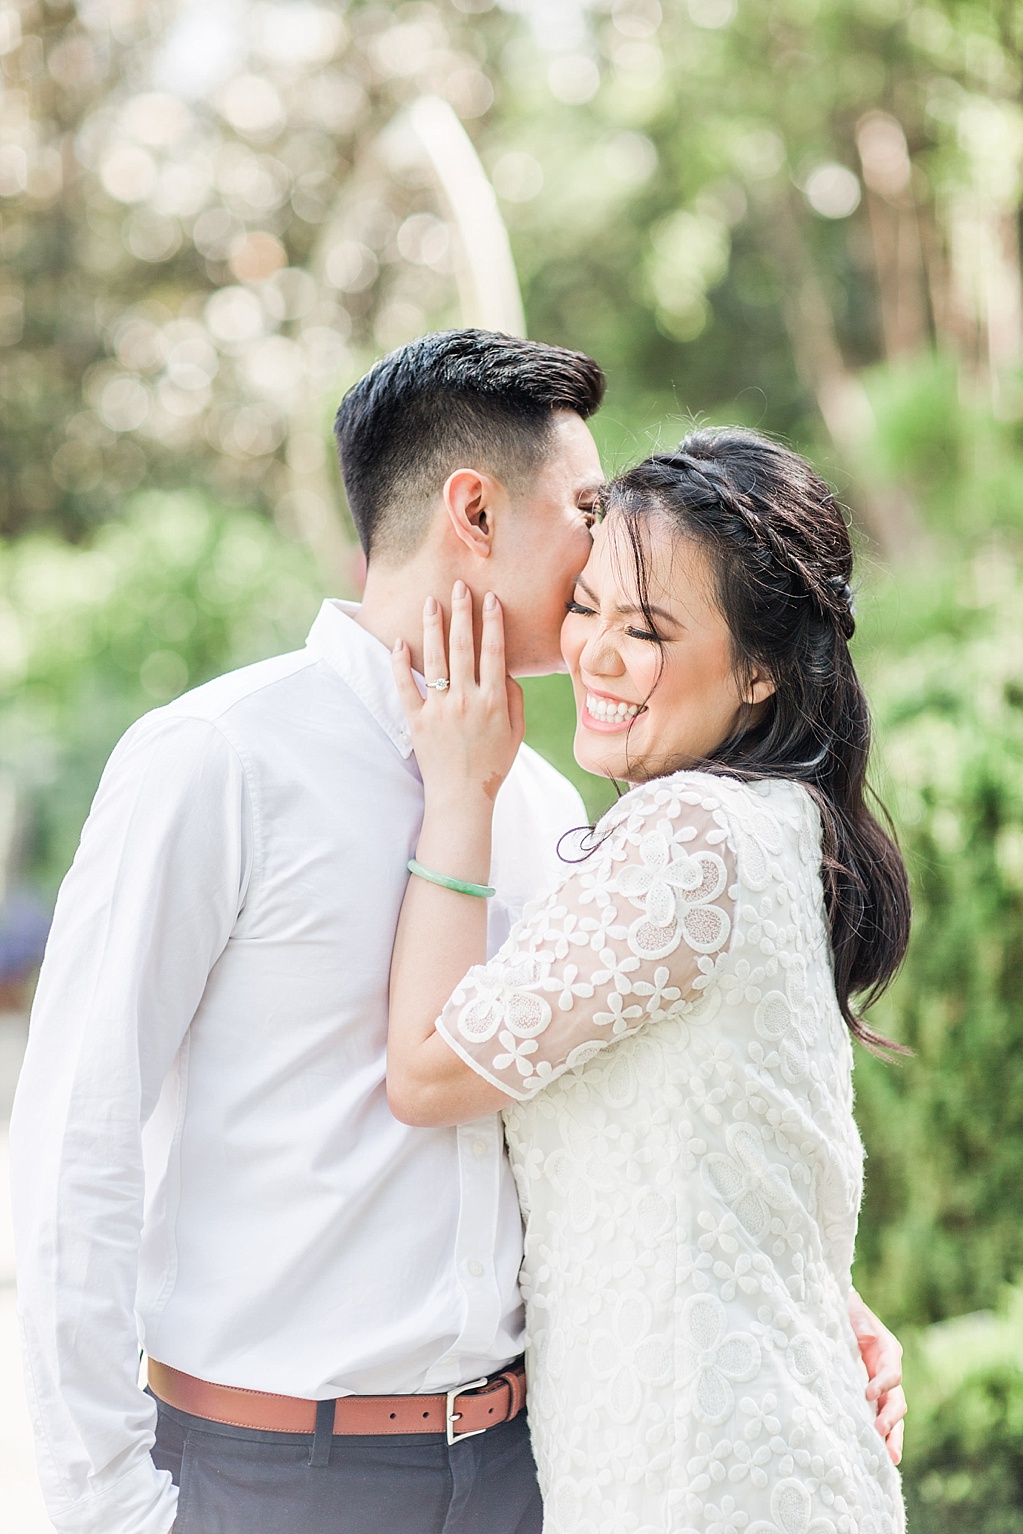 An Elegant Spring Engagement Session at the Dallas Arboretum and Botanical Gardens by Allison Jeffers Wedding Photography 0042